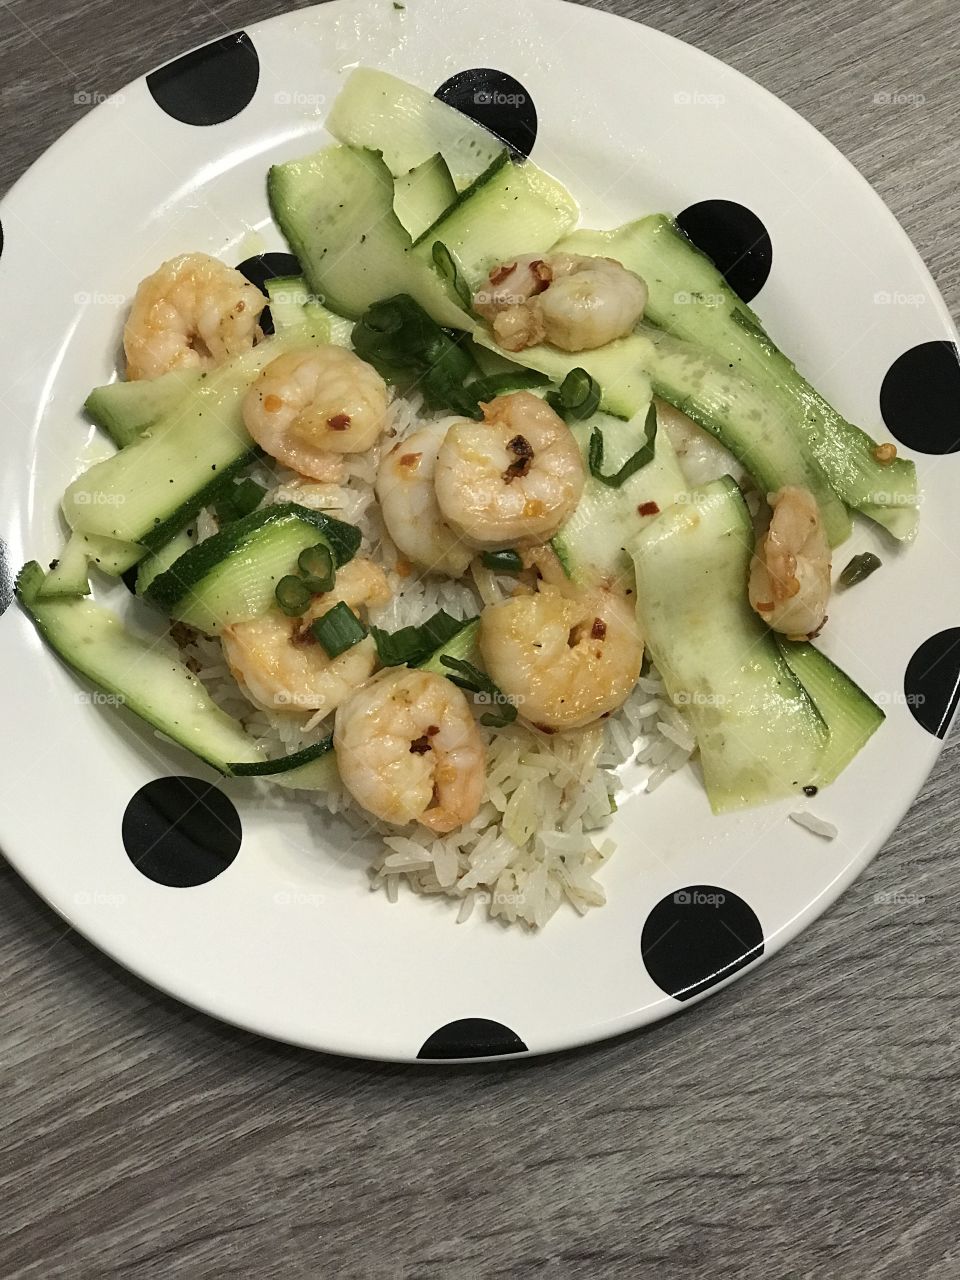 Shrimp and zucchini and rice dish on polka dot black and white plate